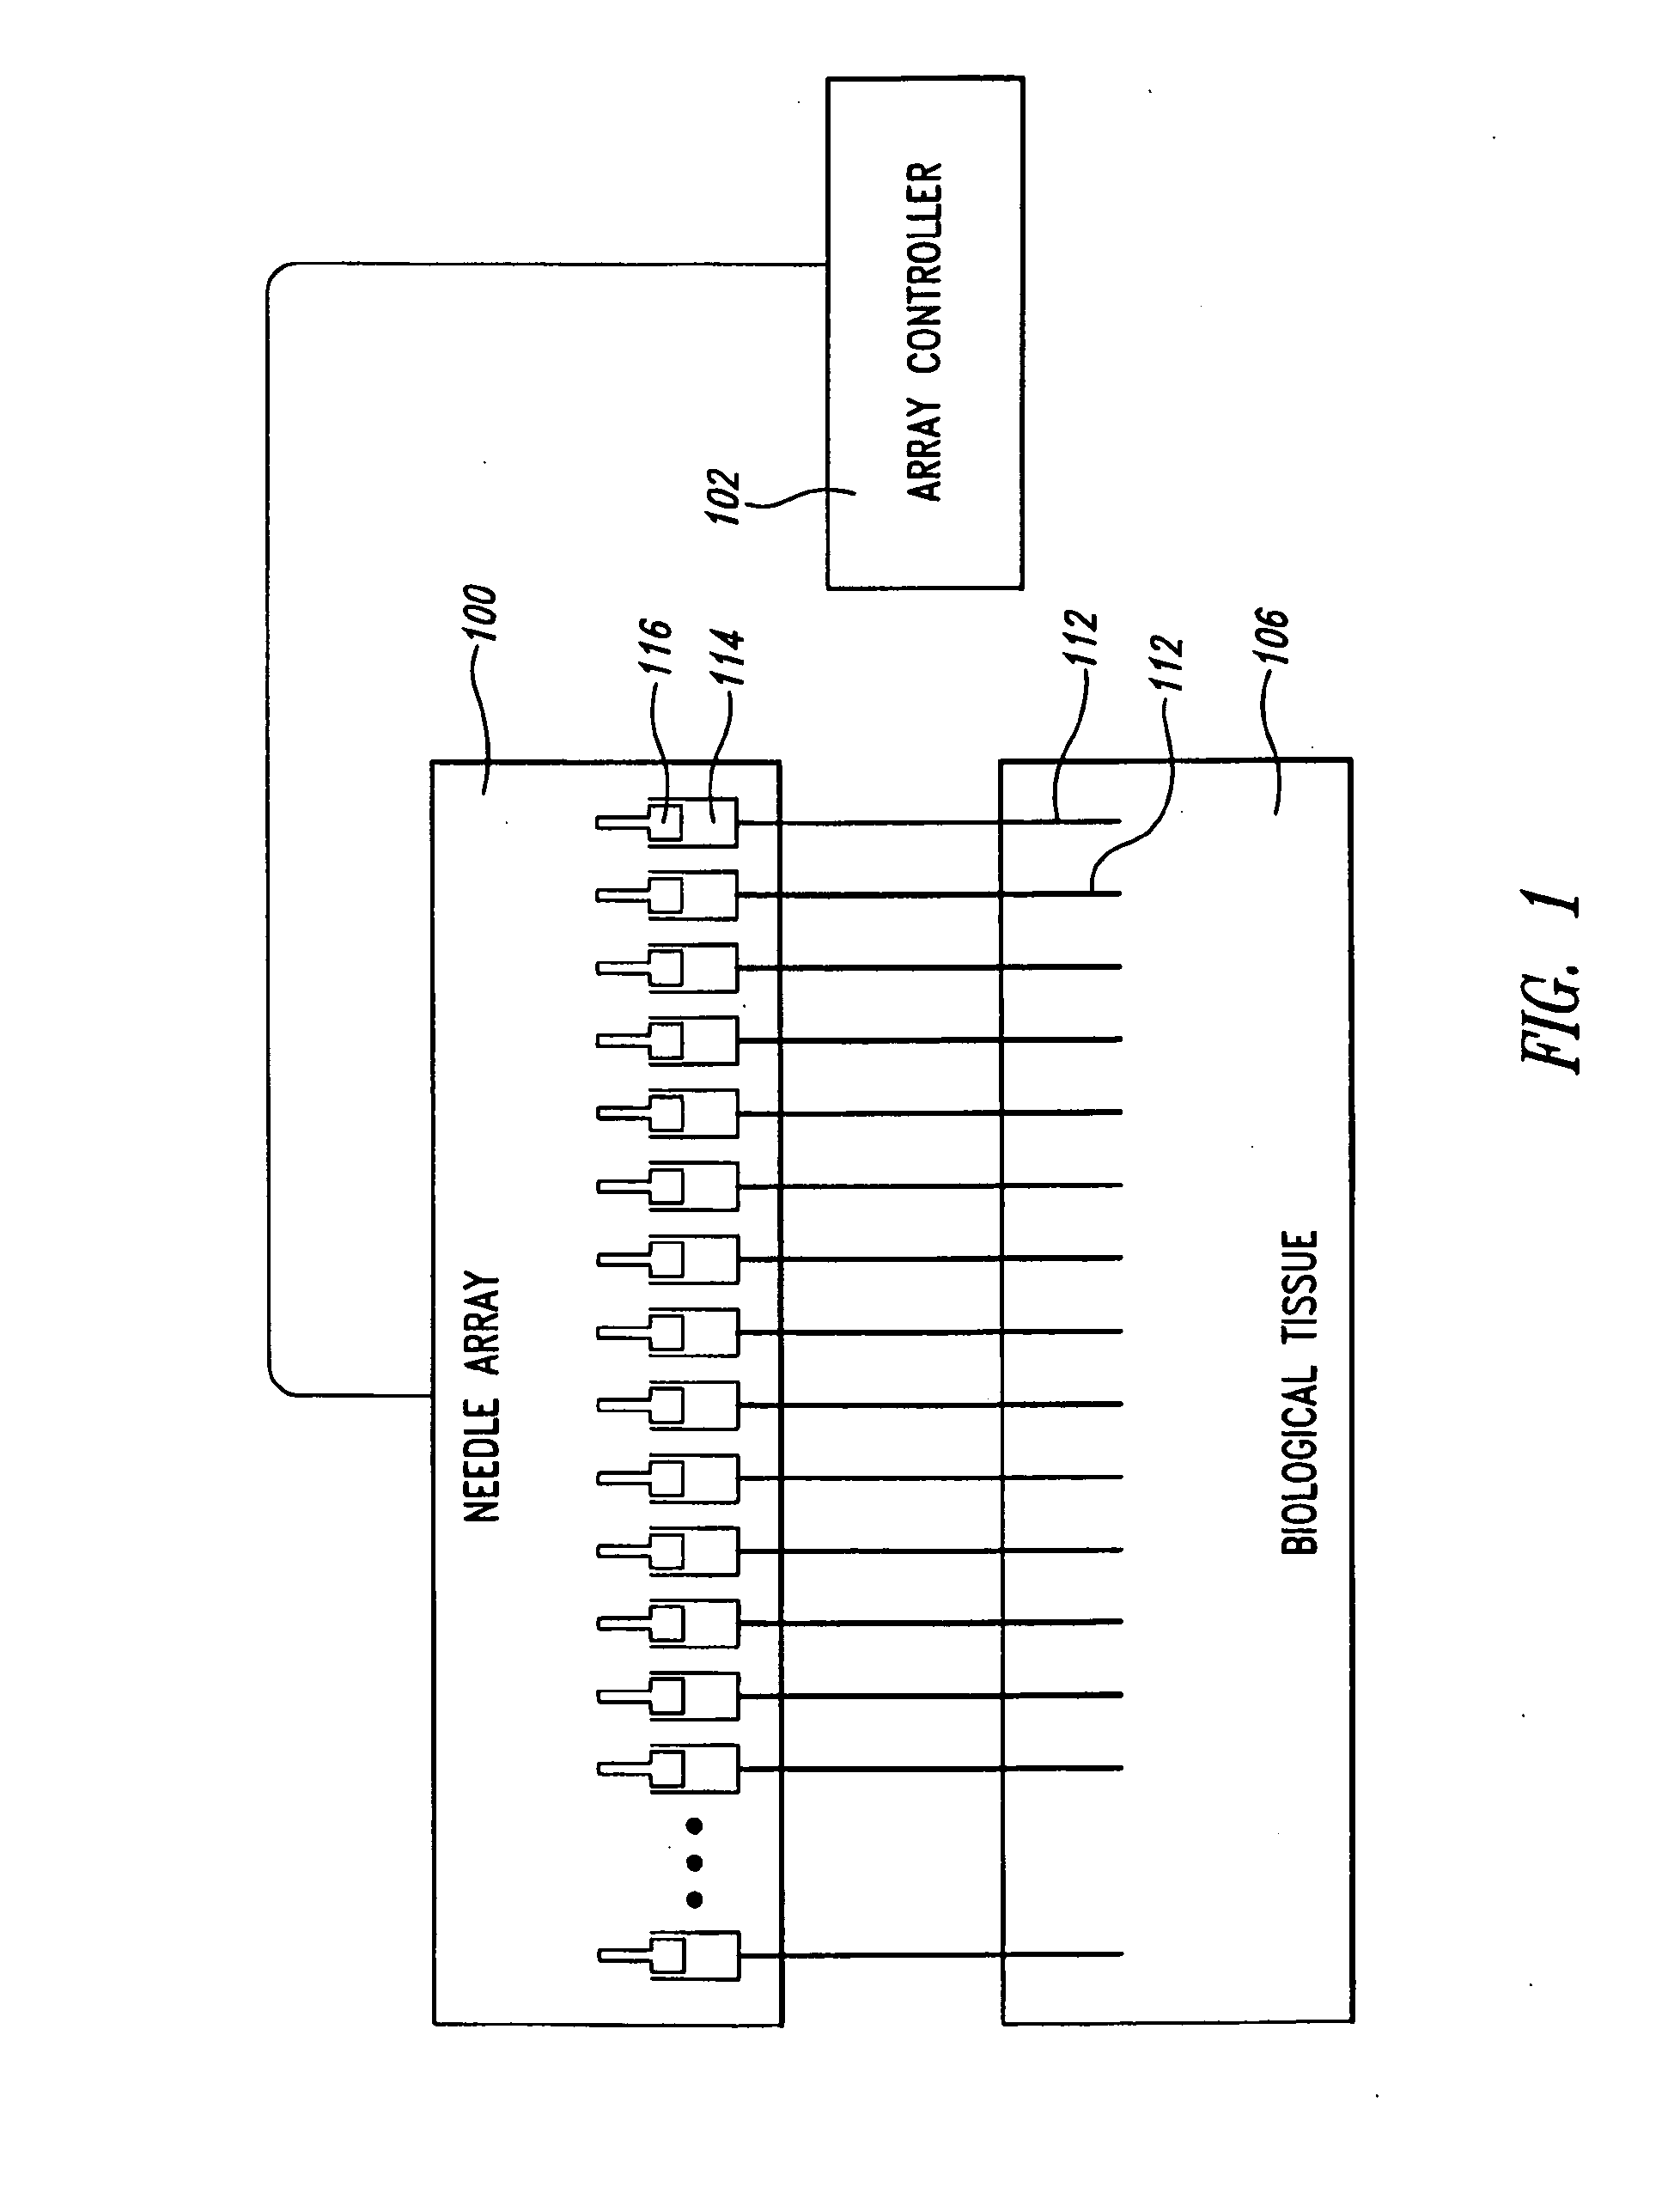 Needle array assembly and method for delivering therapeutic agents